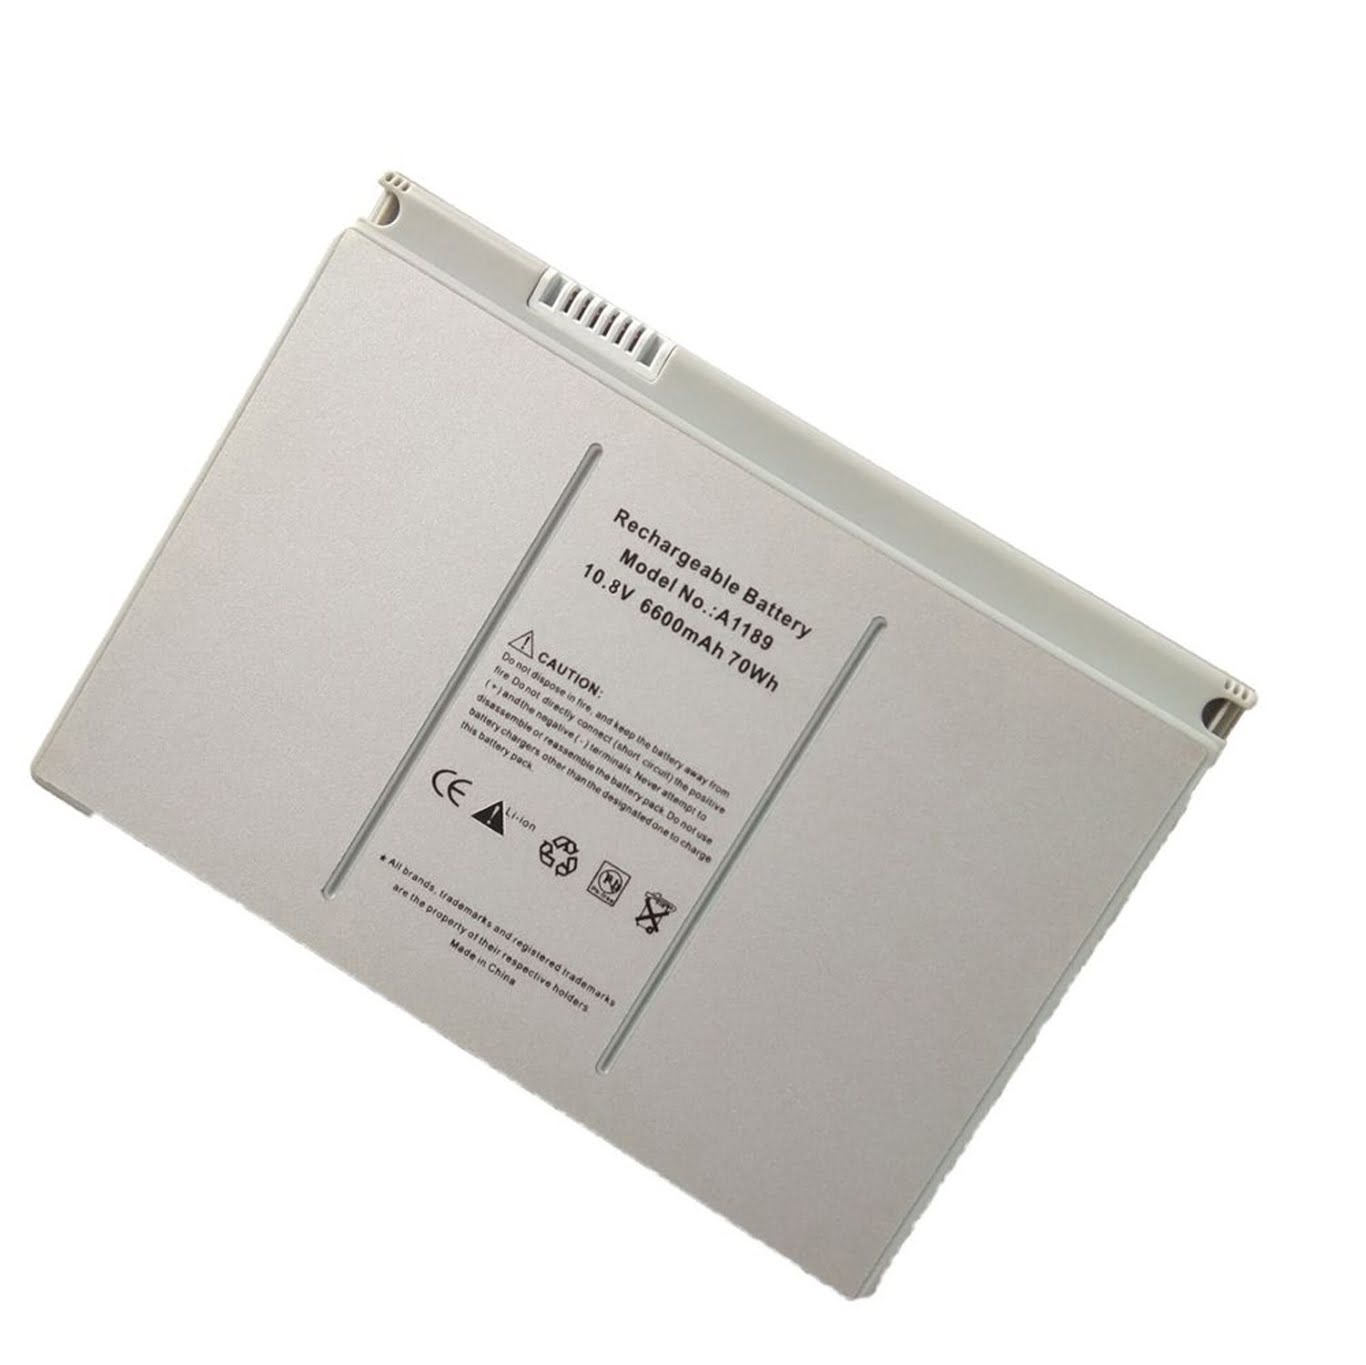 Apple 661-4618, A1189 Laptop Battery For Macbook Pro 17